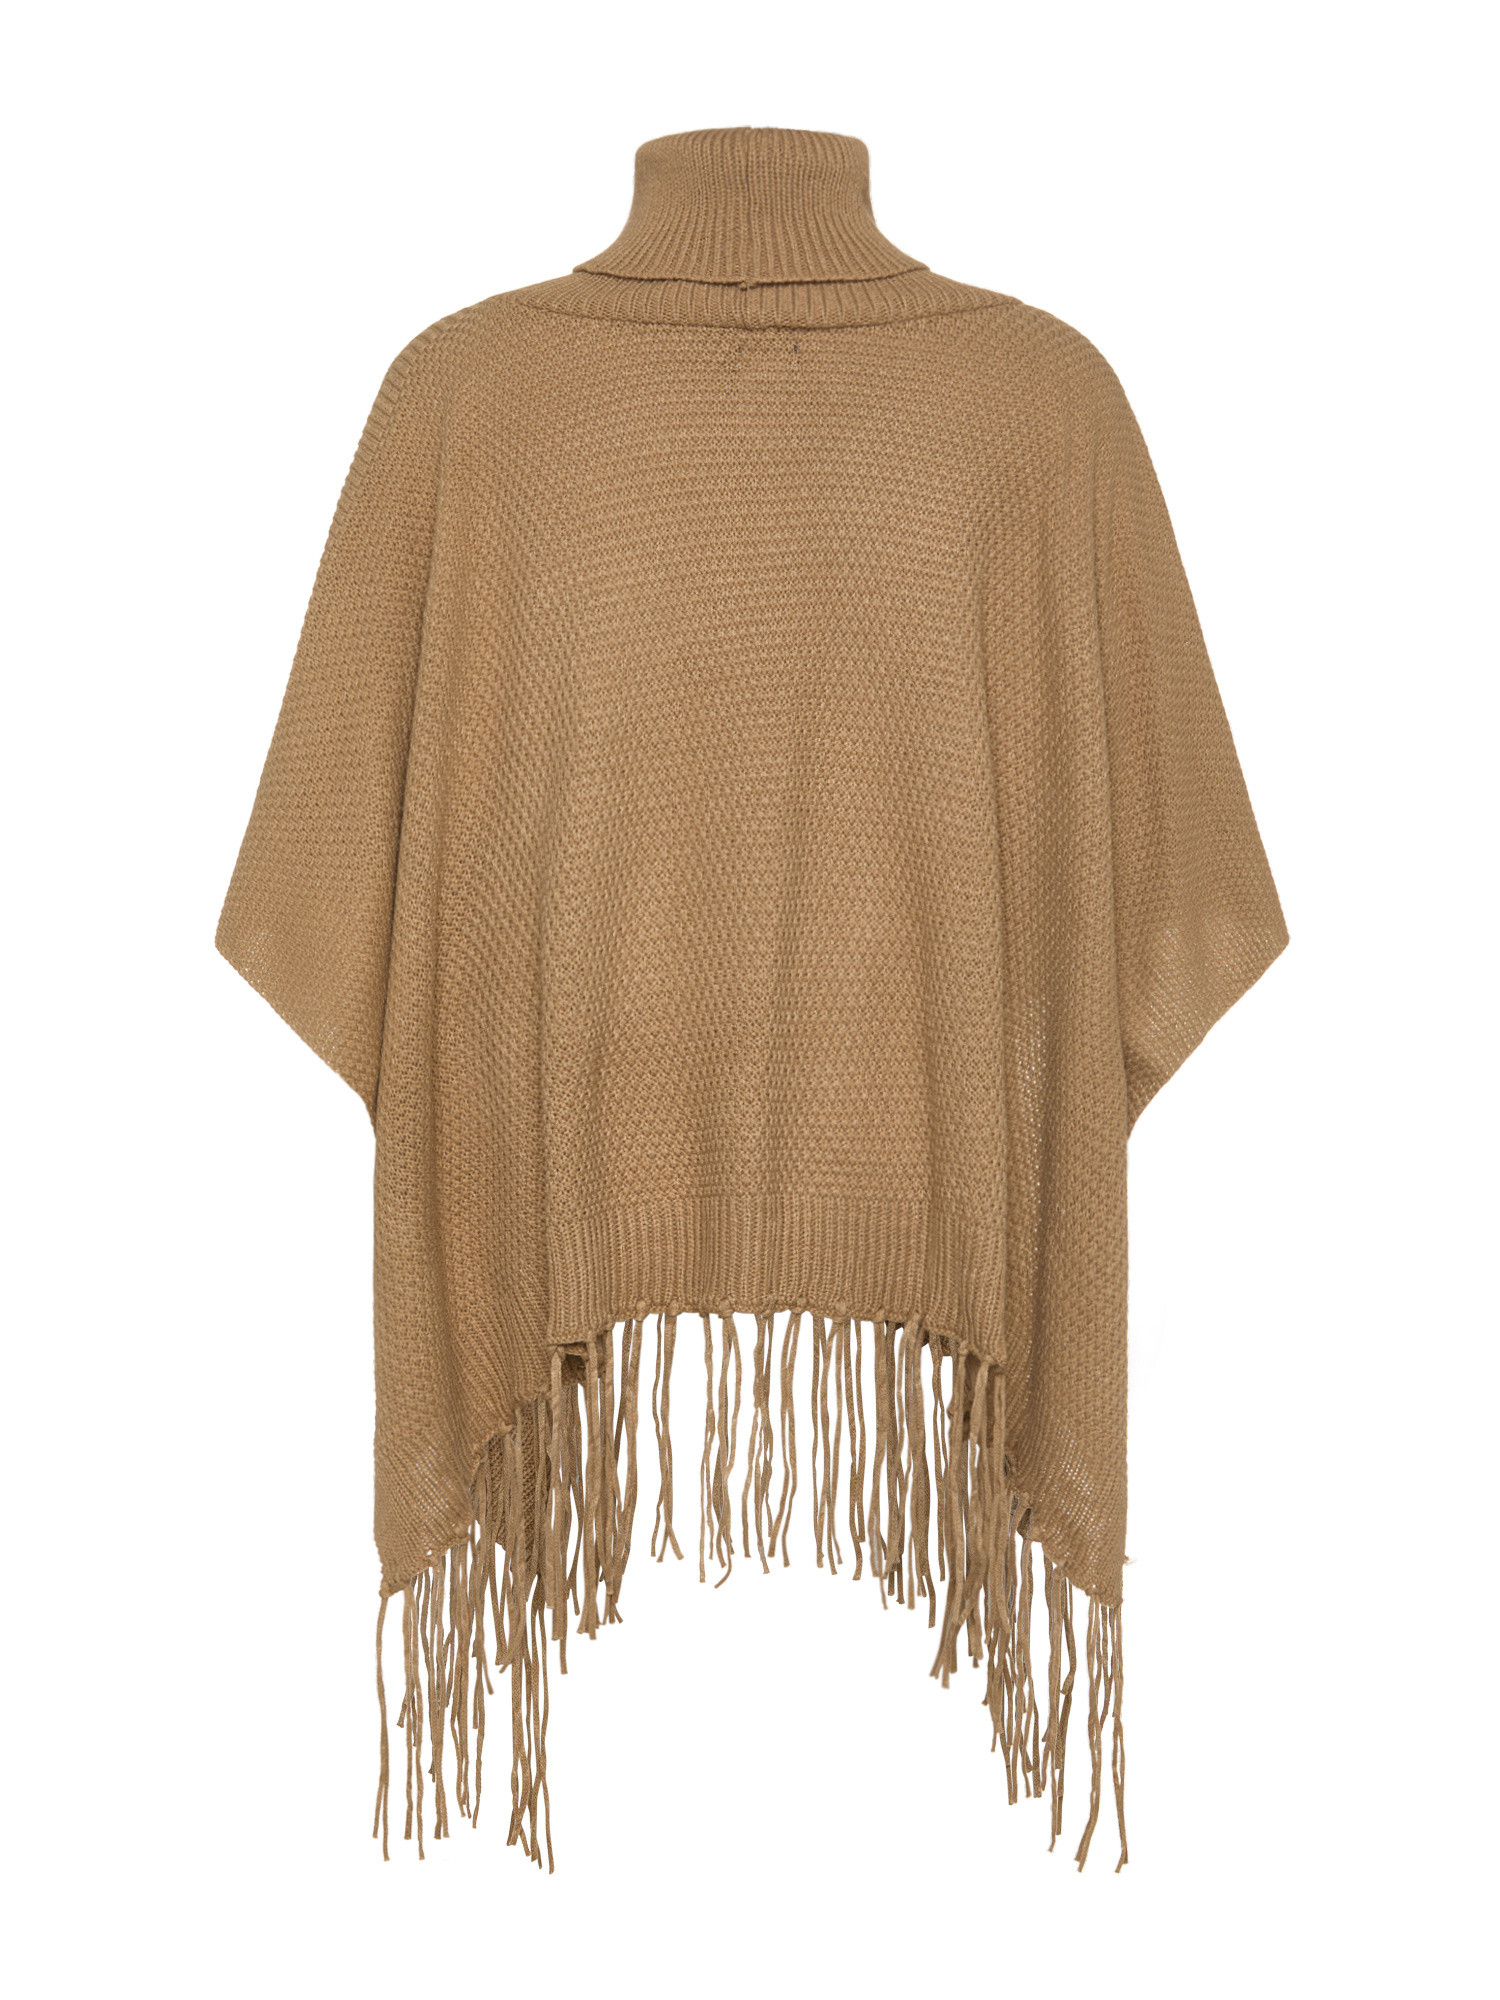 Koan - Poncho in maglia, Cammello, large image number 1